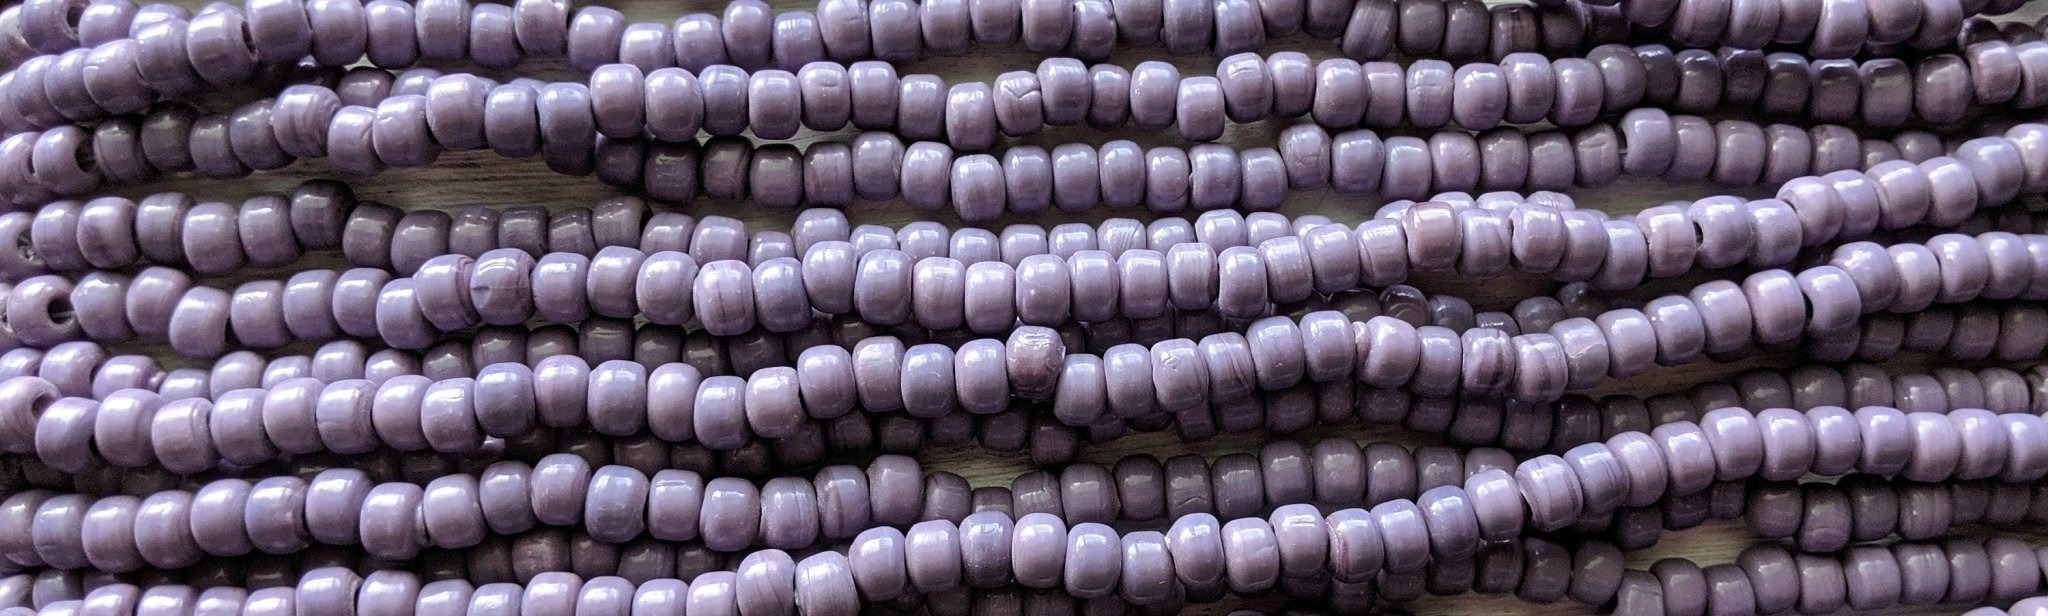 Opaque Light Purple - Size 9x6mm (3mm hole) Recycled Glass Crow Beads - 24 Inch Strand (ICB02) - Beads and Babble